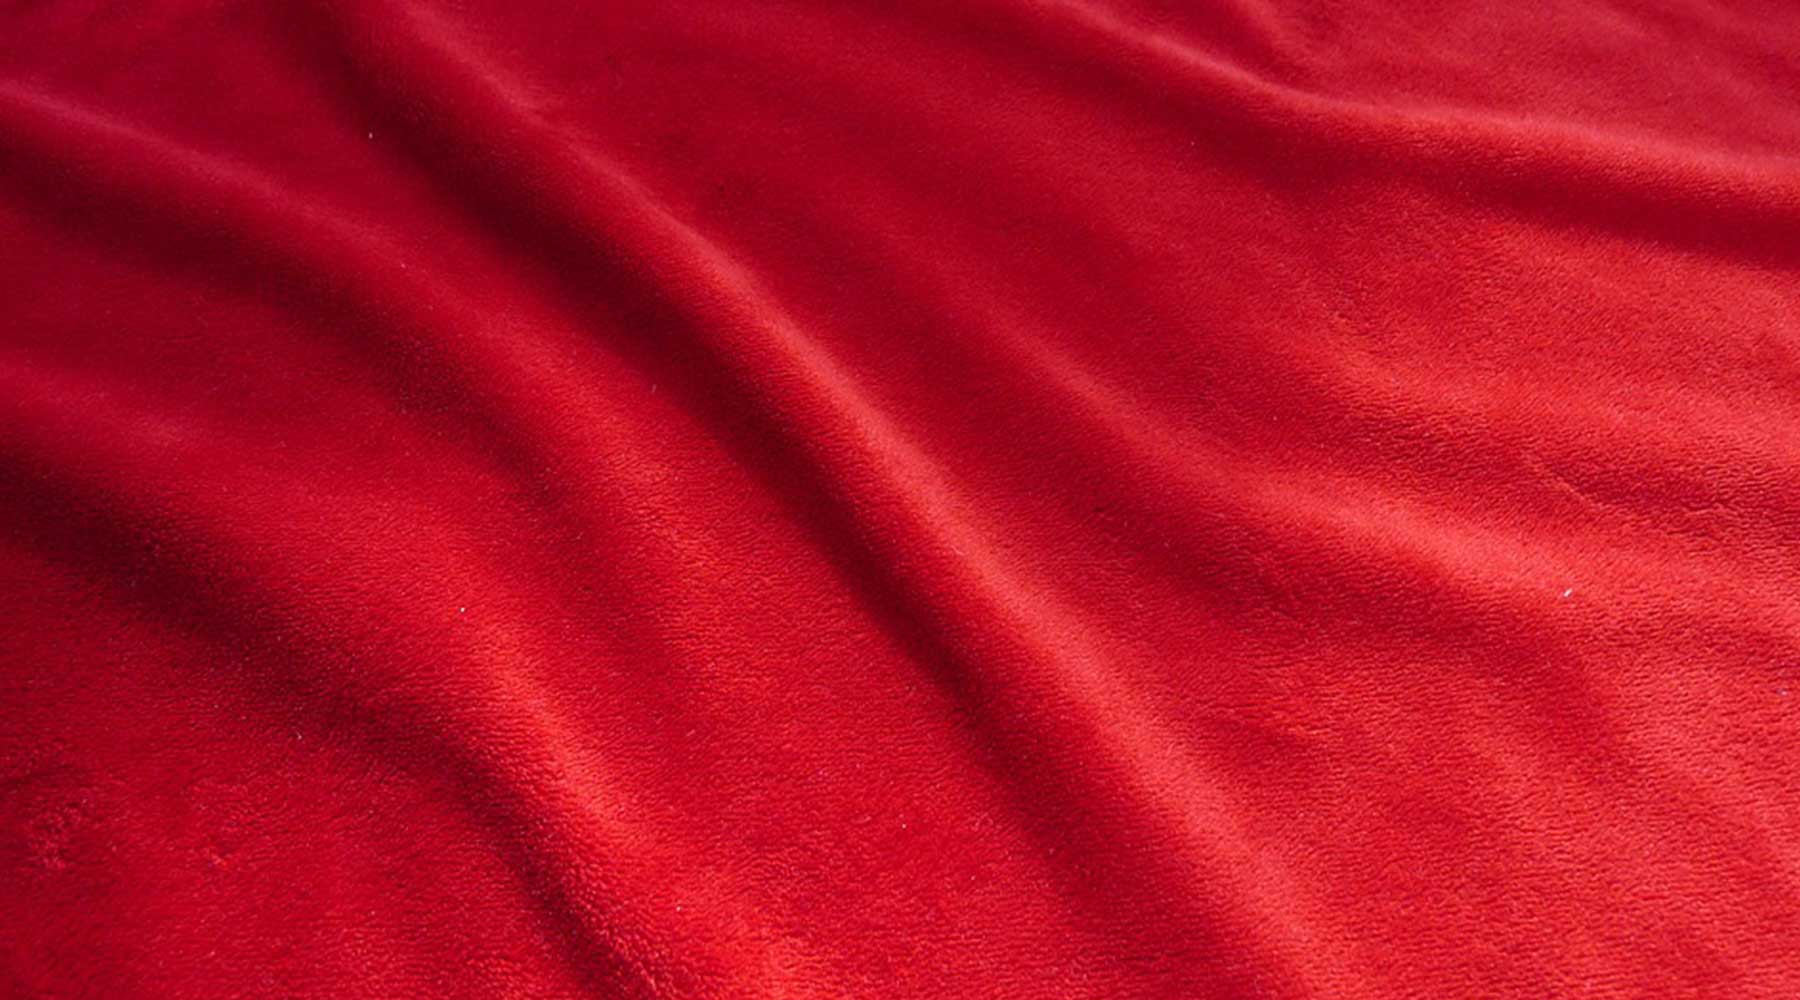 Velvet Fabric: a Quick History of How It Became Popular